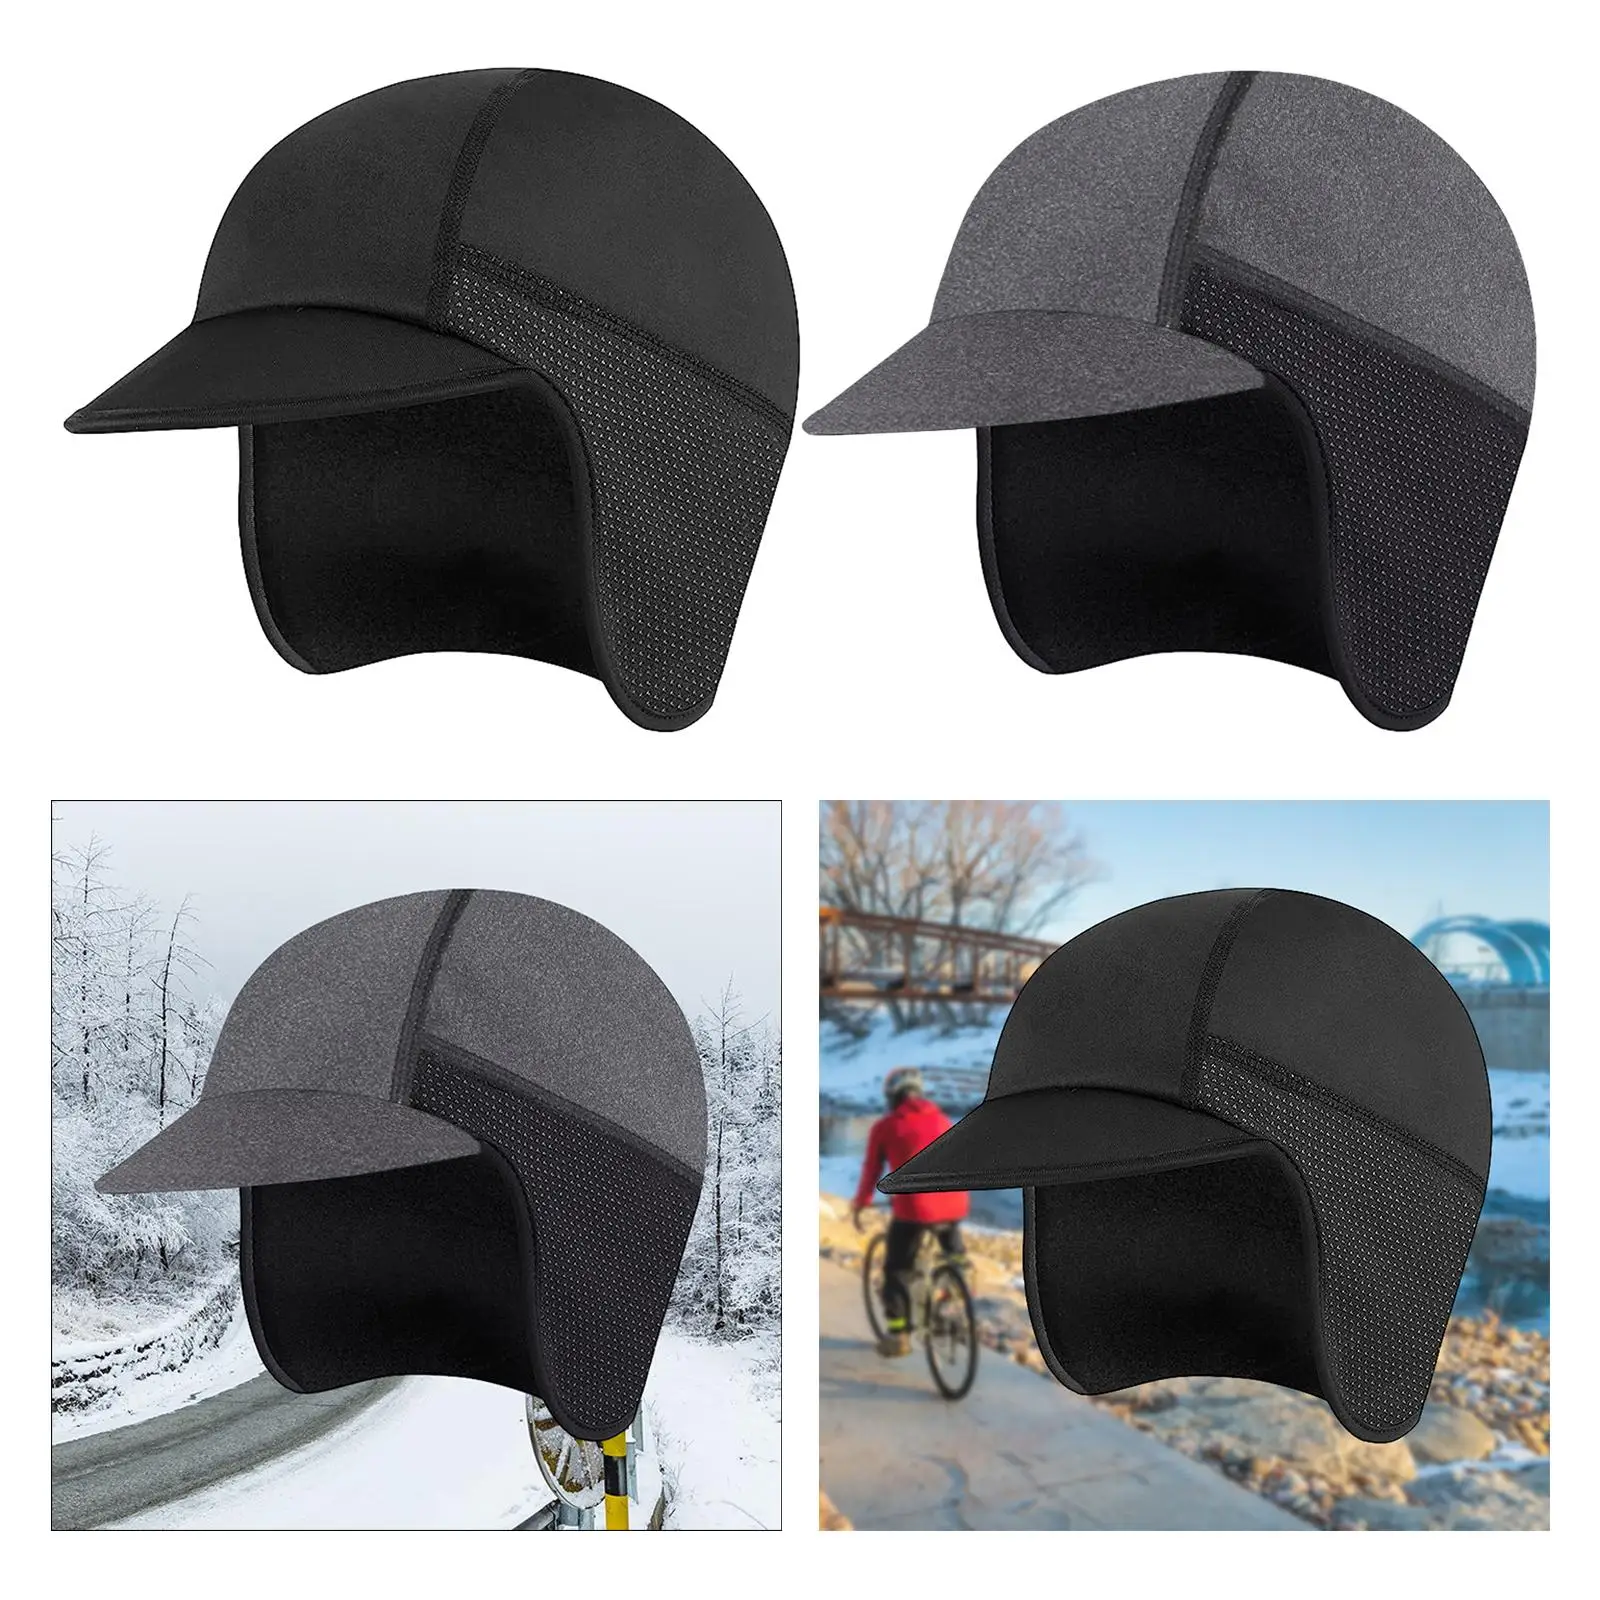 Cycling Hat Sweat Absorbent Baggy Hat Outdoor Warm Ear Protectors Sports Hat Lining Cap for Running Camping Hiking Ski Jogging